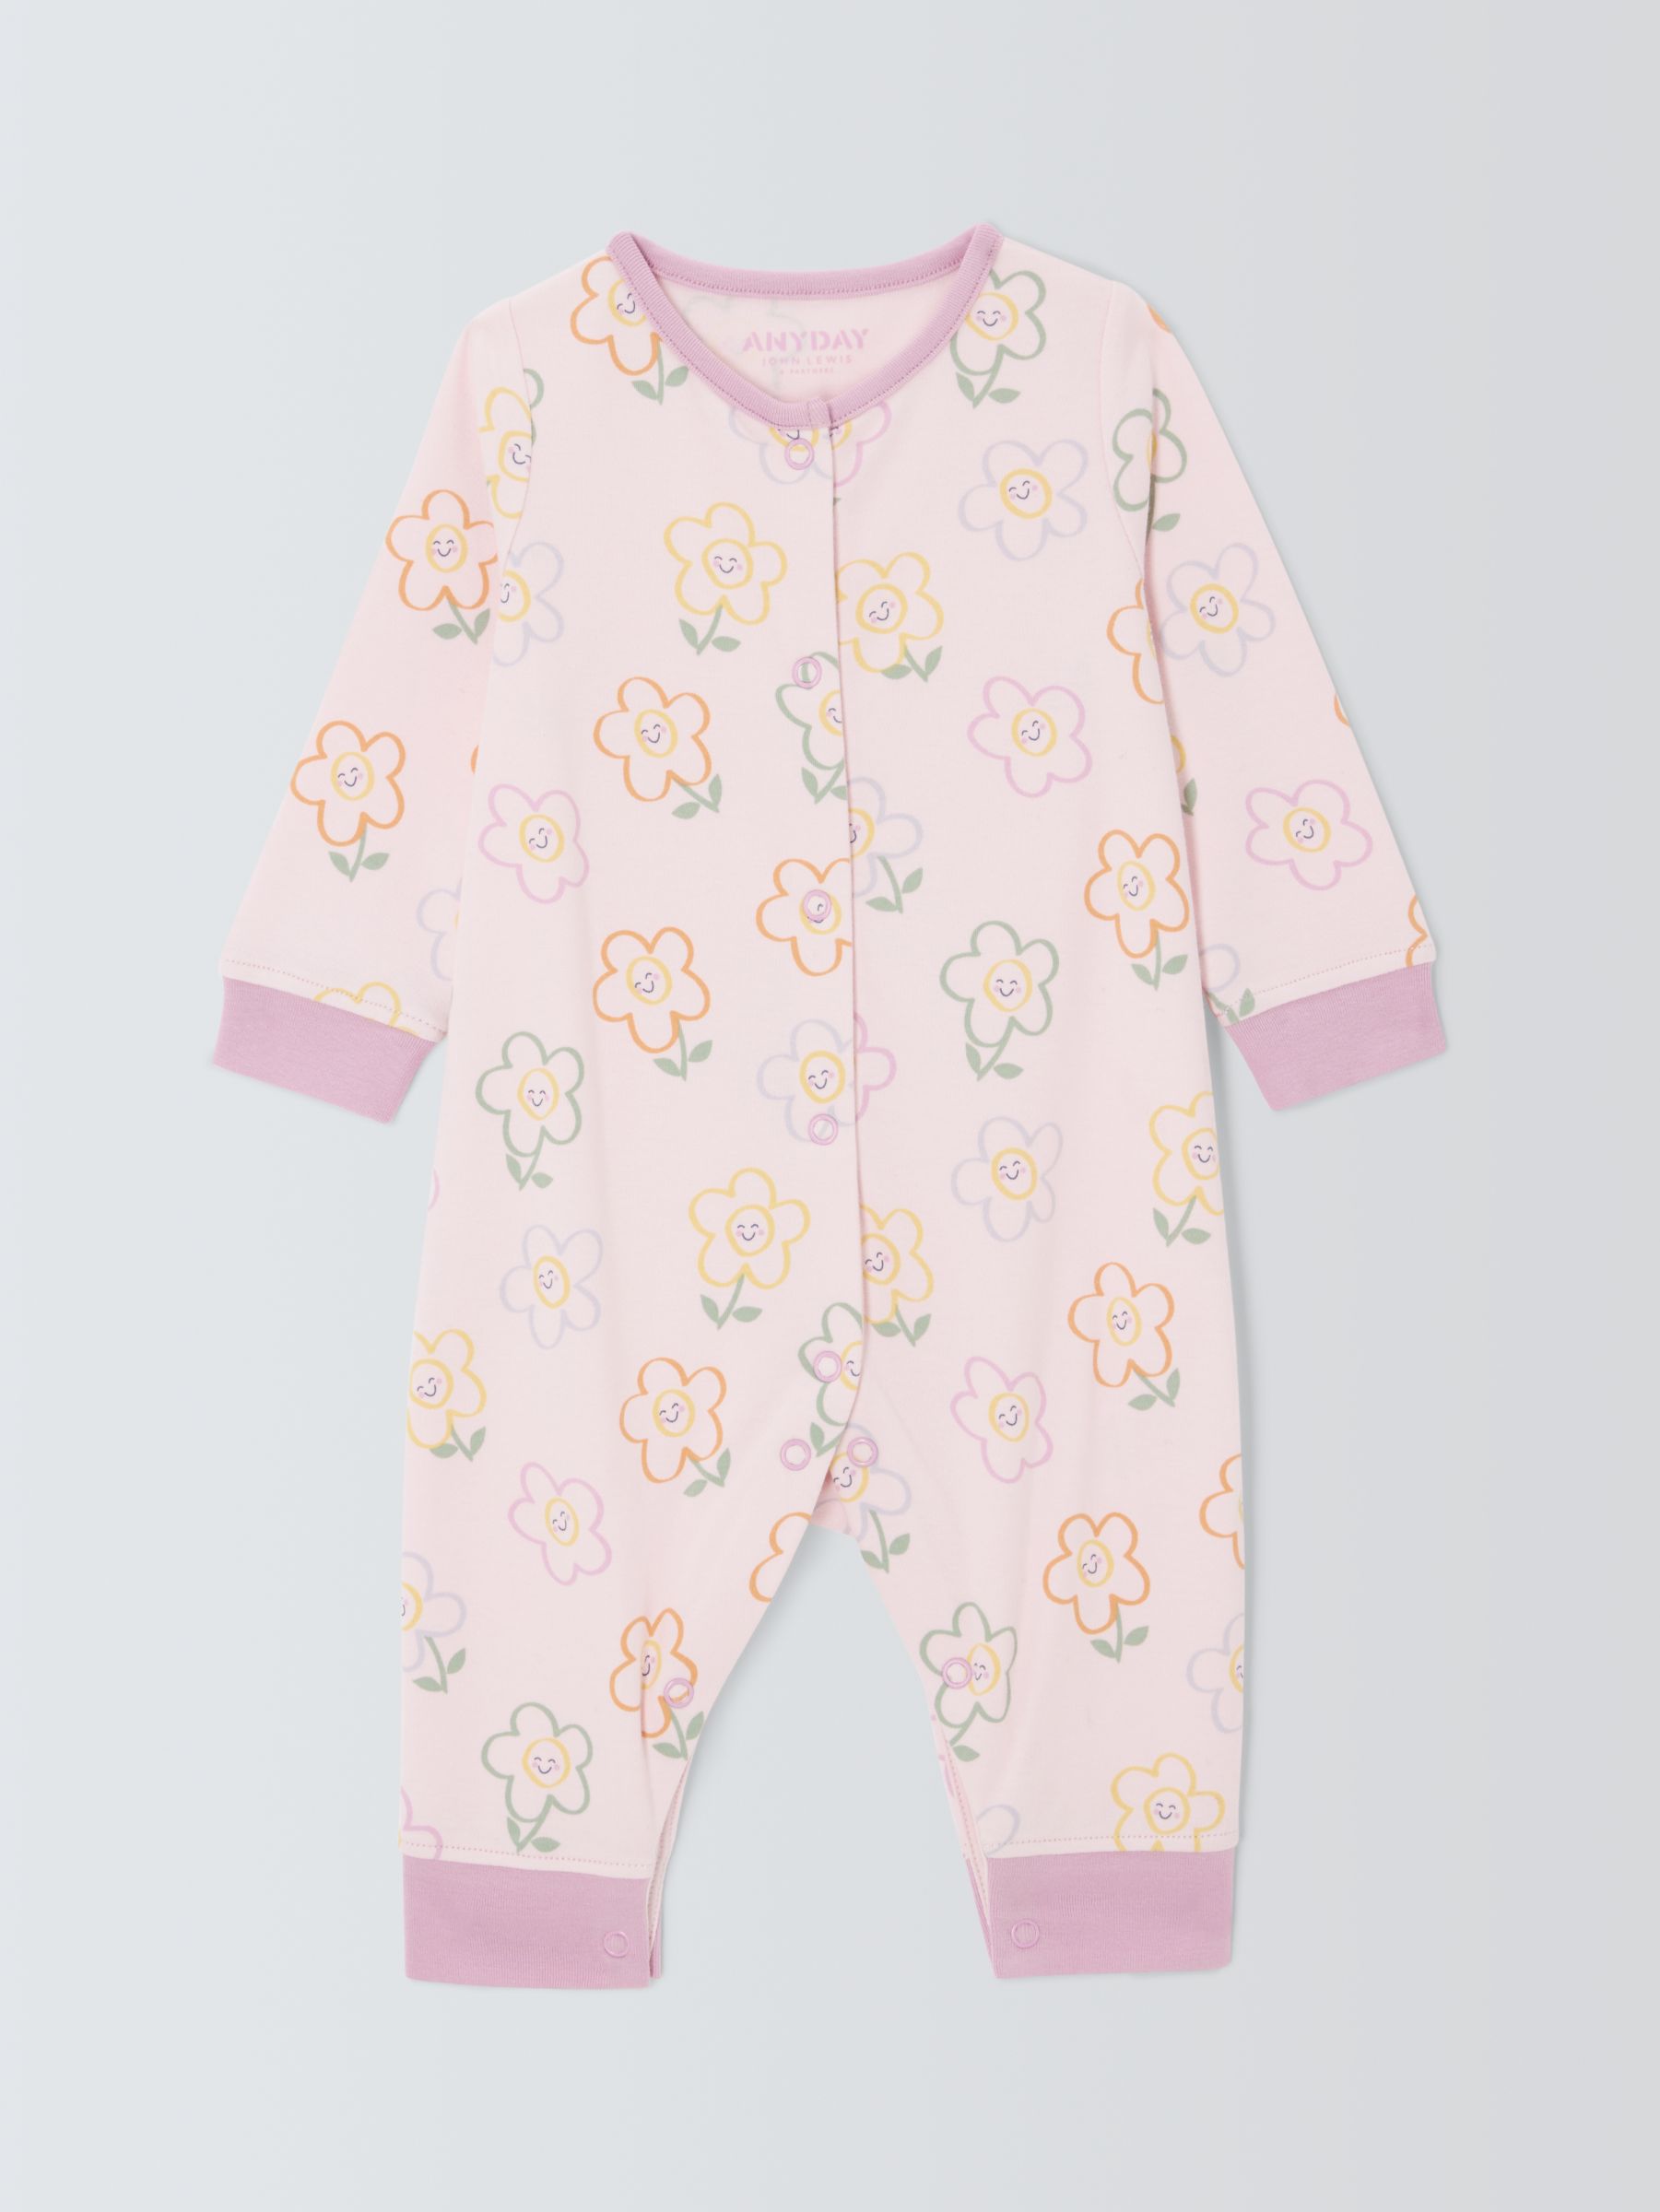 John Lewis ANYDAY Baby Cotton Floral Sleepsuit, Pink, 3-6 months